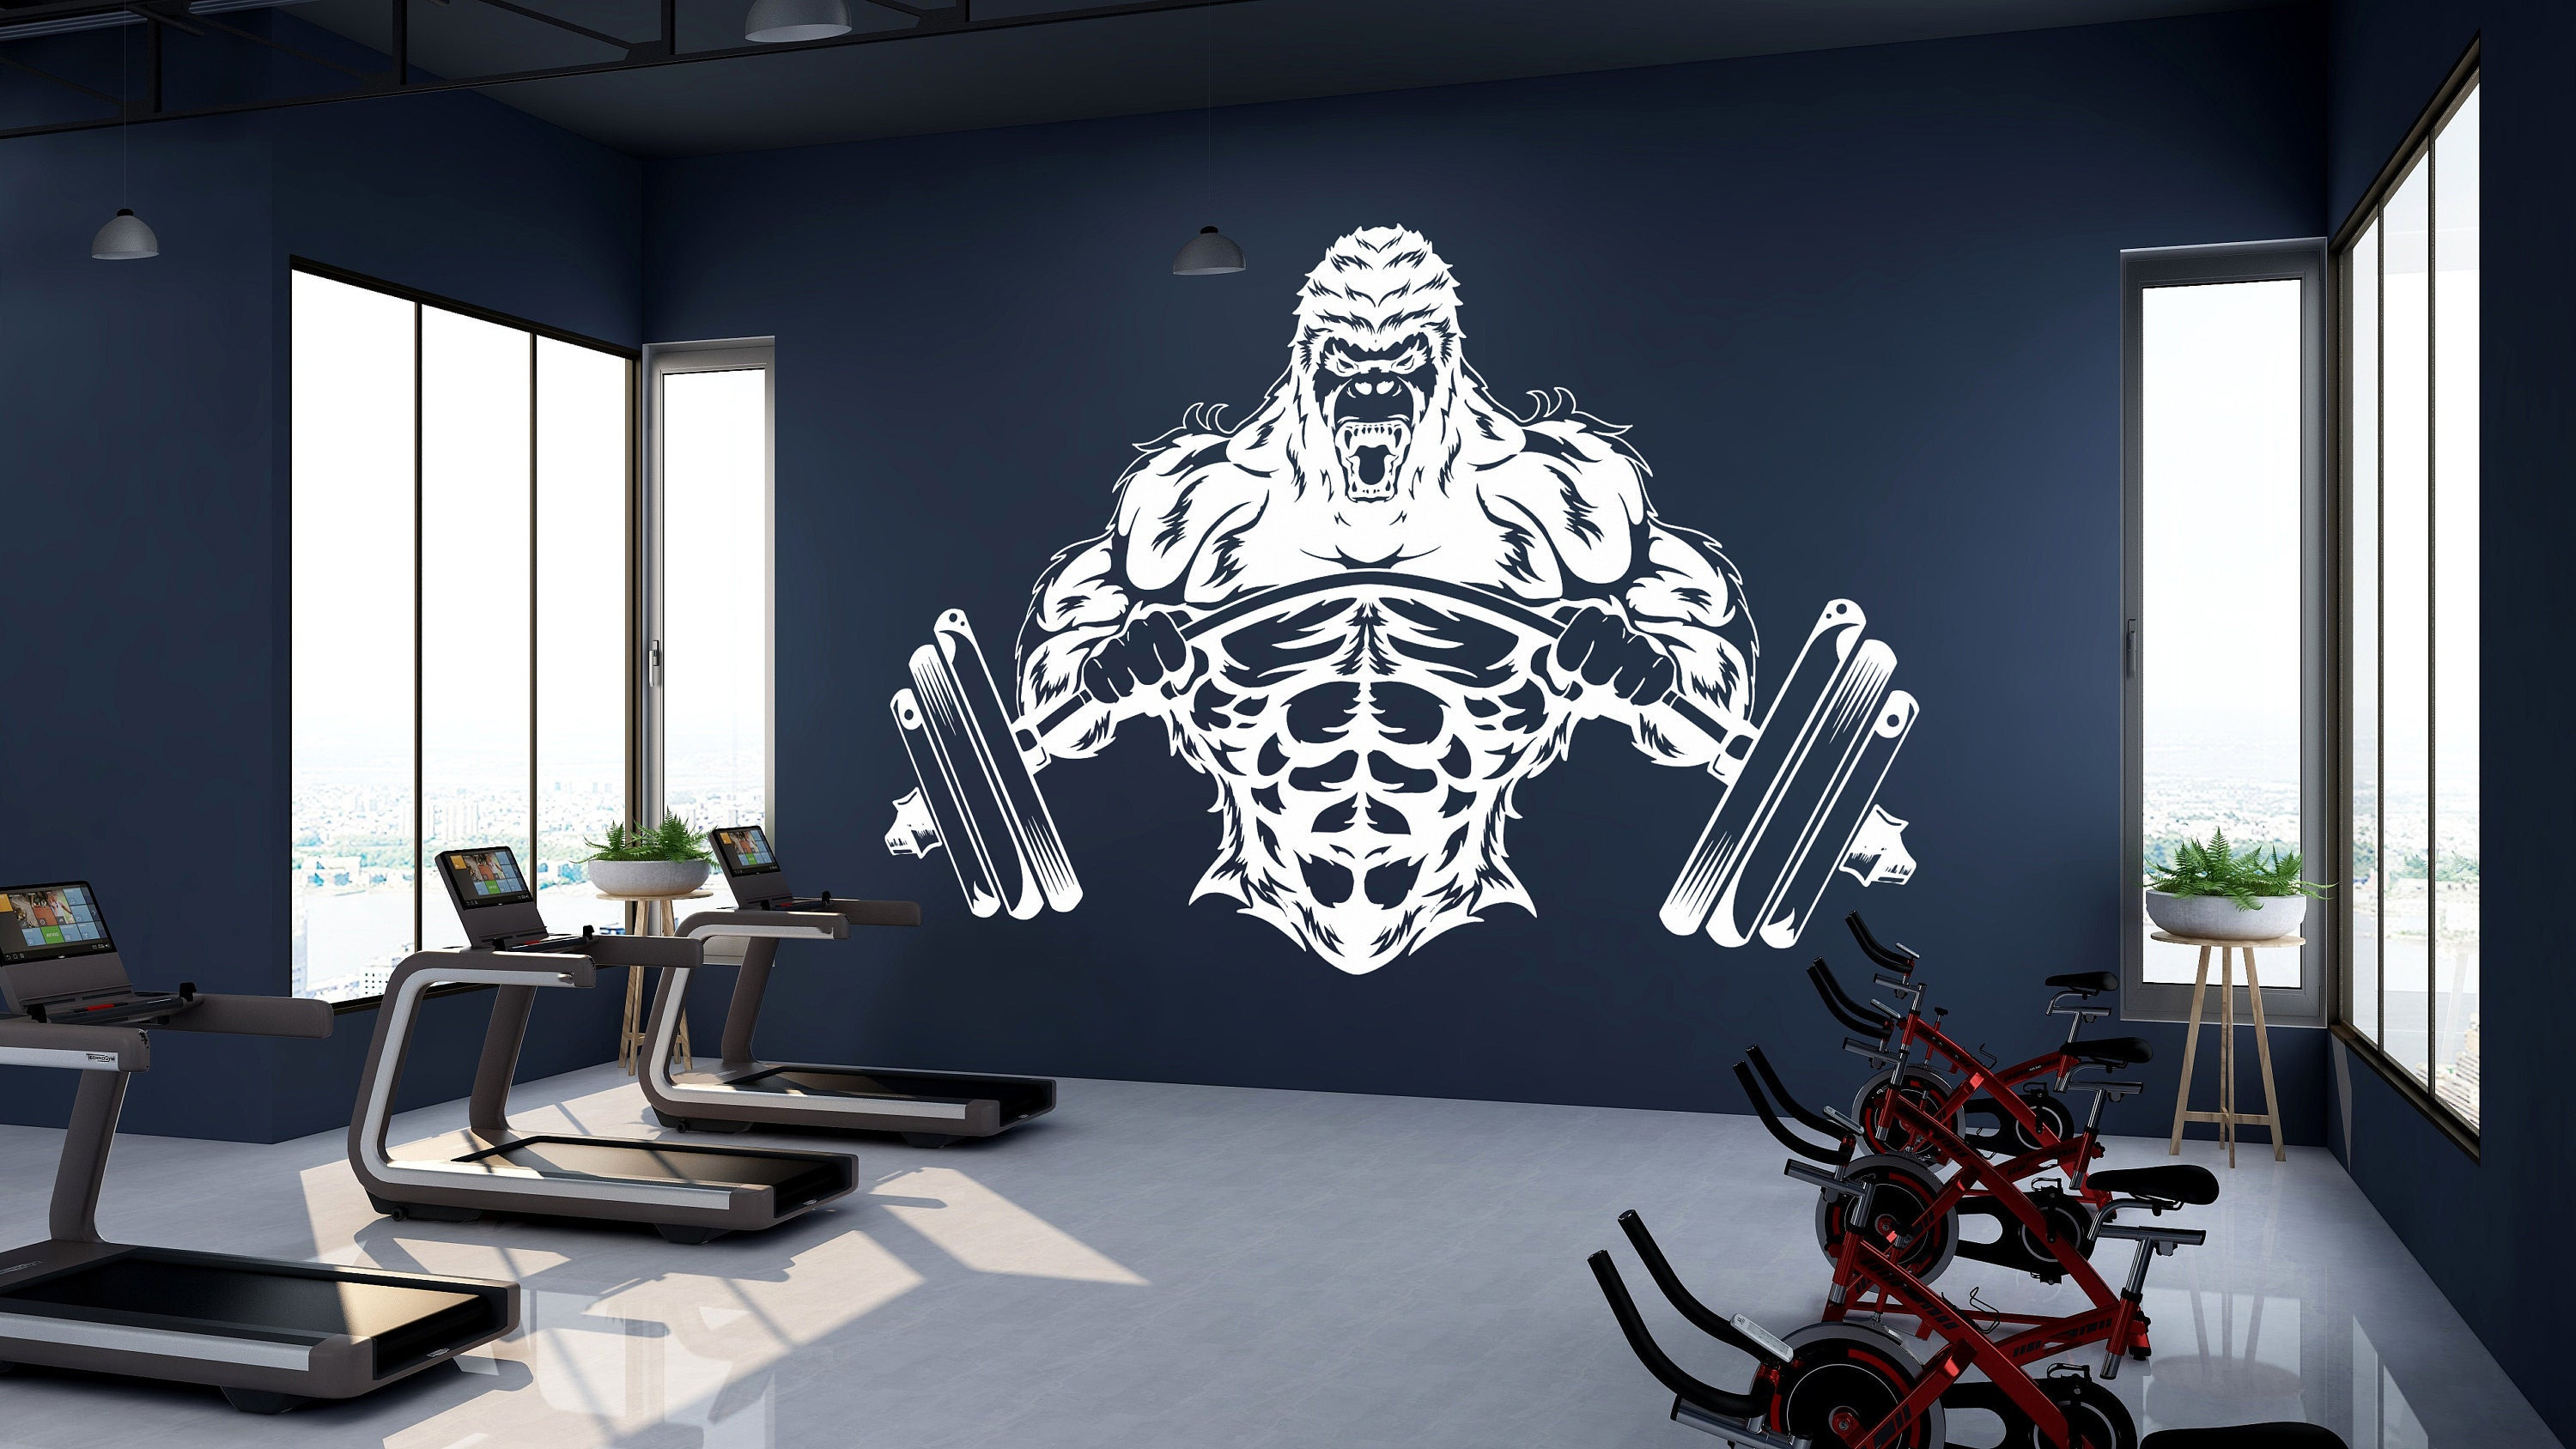 Wall mural ideas for the gym